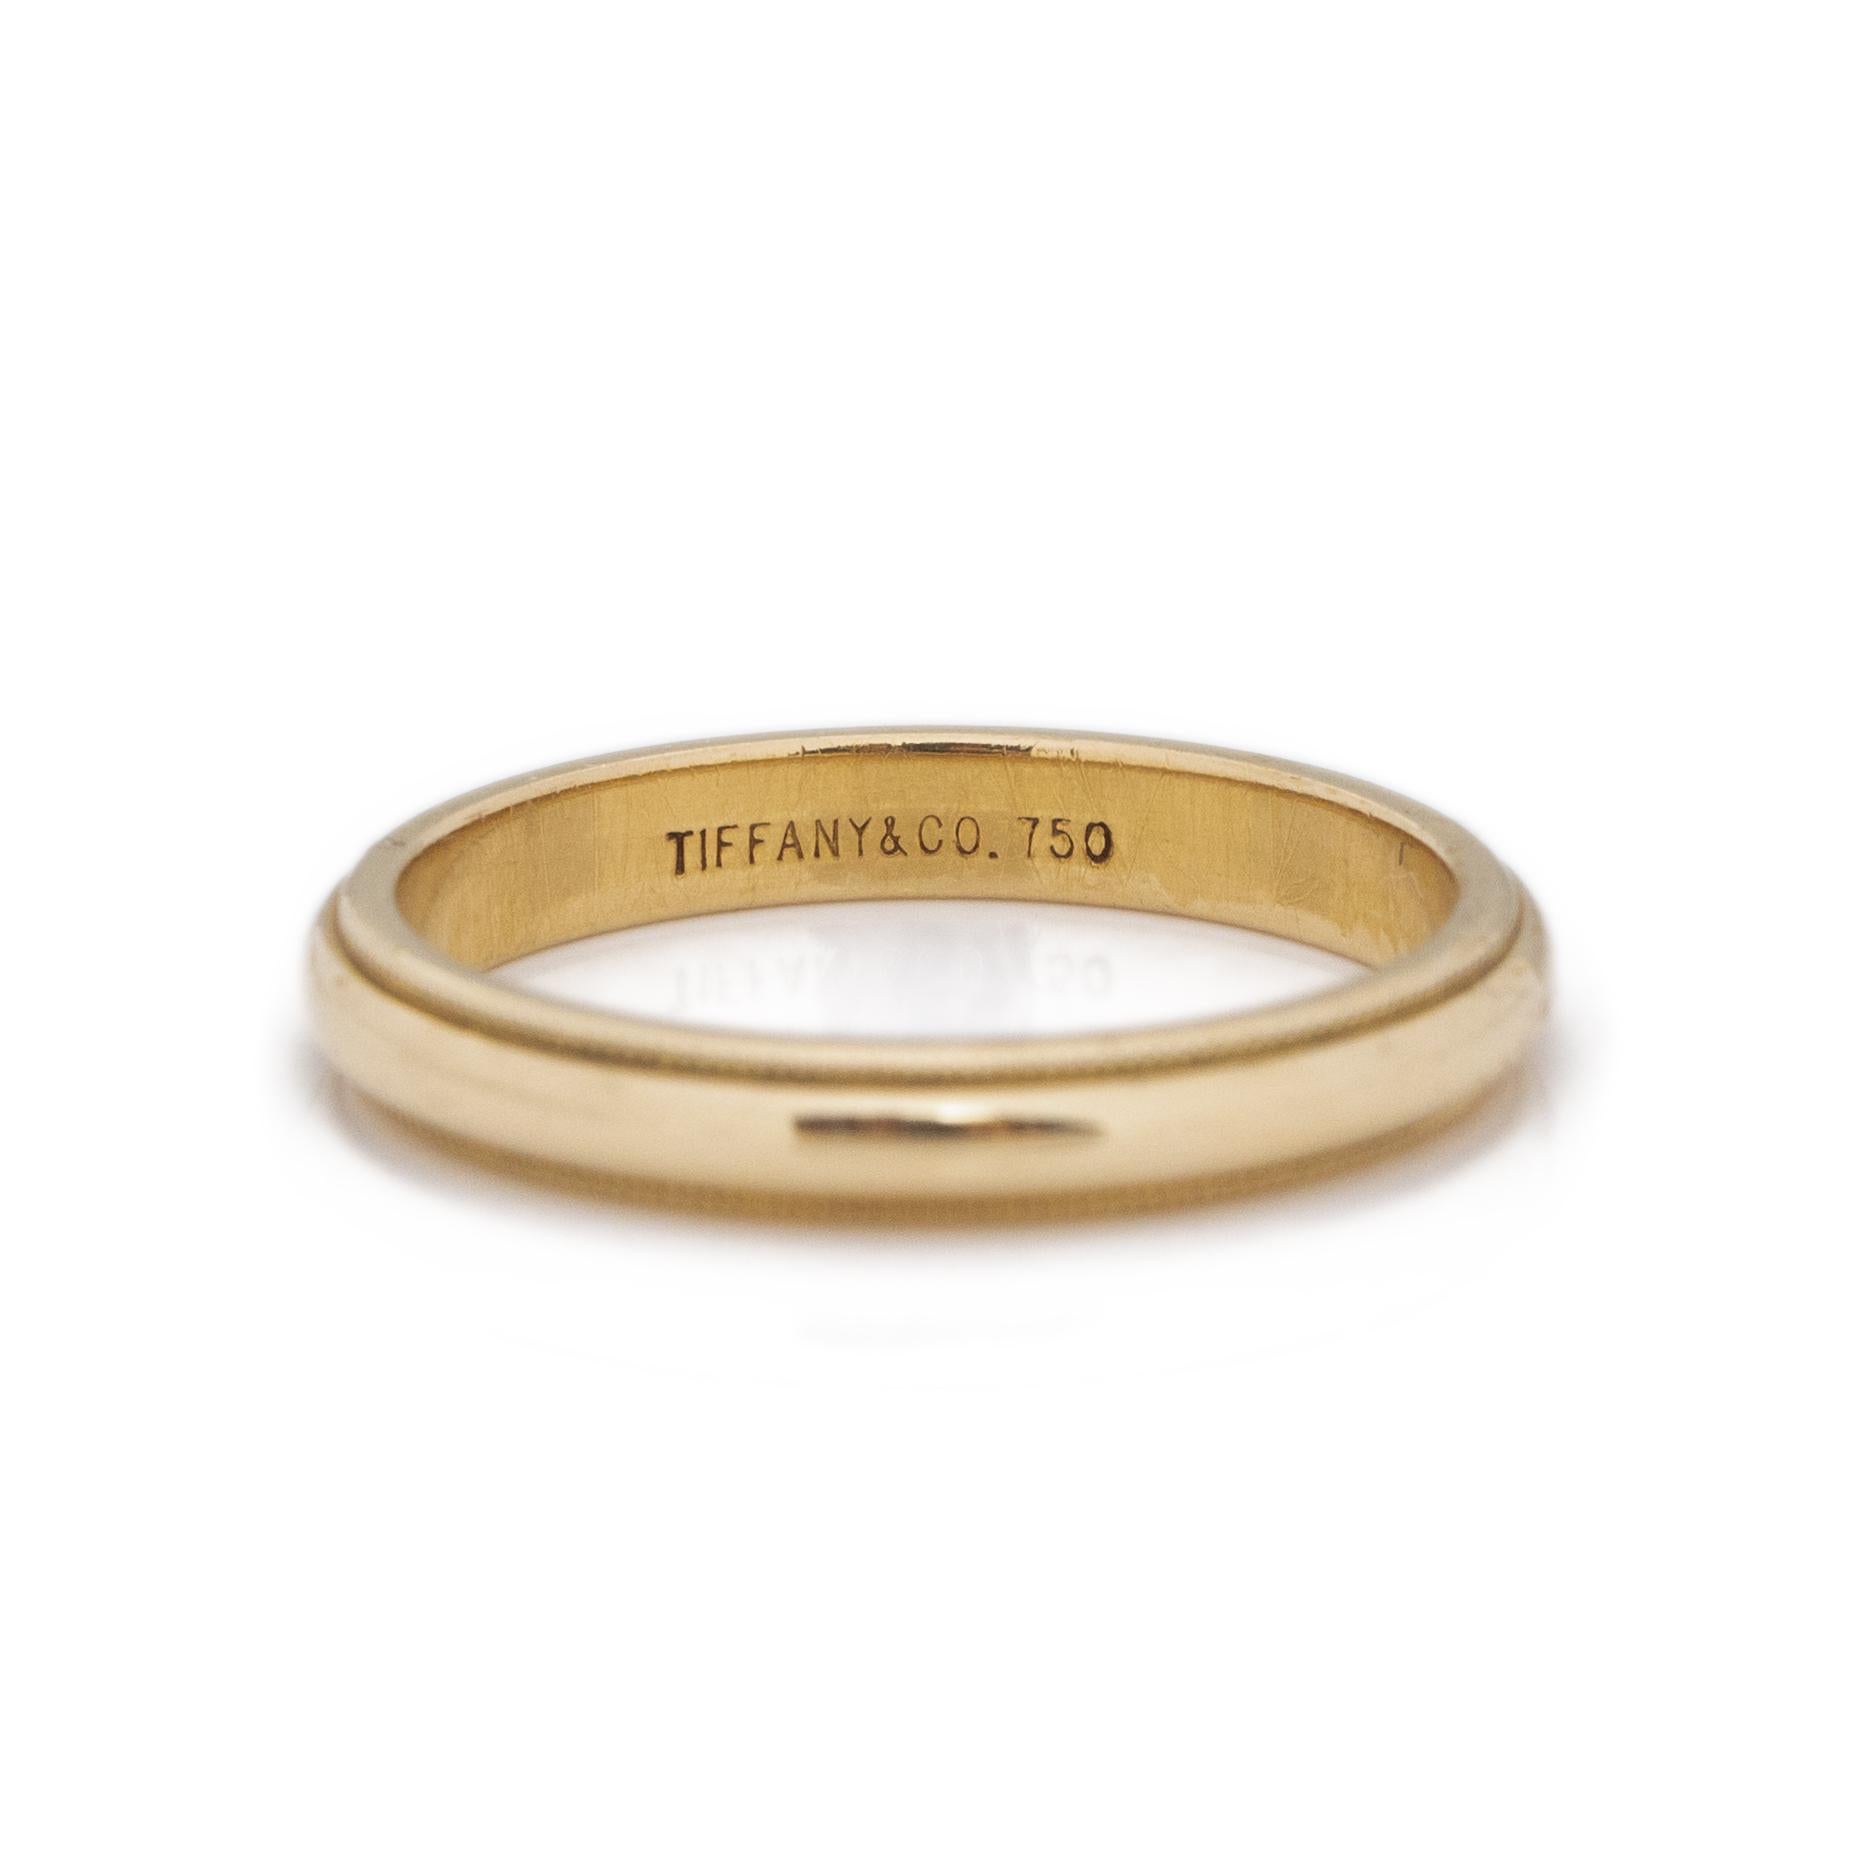 This Tiffany & Co. made beauty is in excellent condition and has a wonderful minimalist vibe to it. Crafted in 18K yellow gold, the shine and color in this piece is breathtaking. In the middle of to delicately carved milgrain borders is a smooth